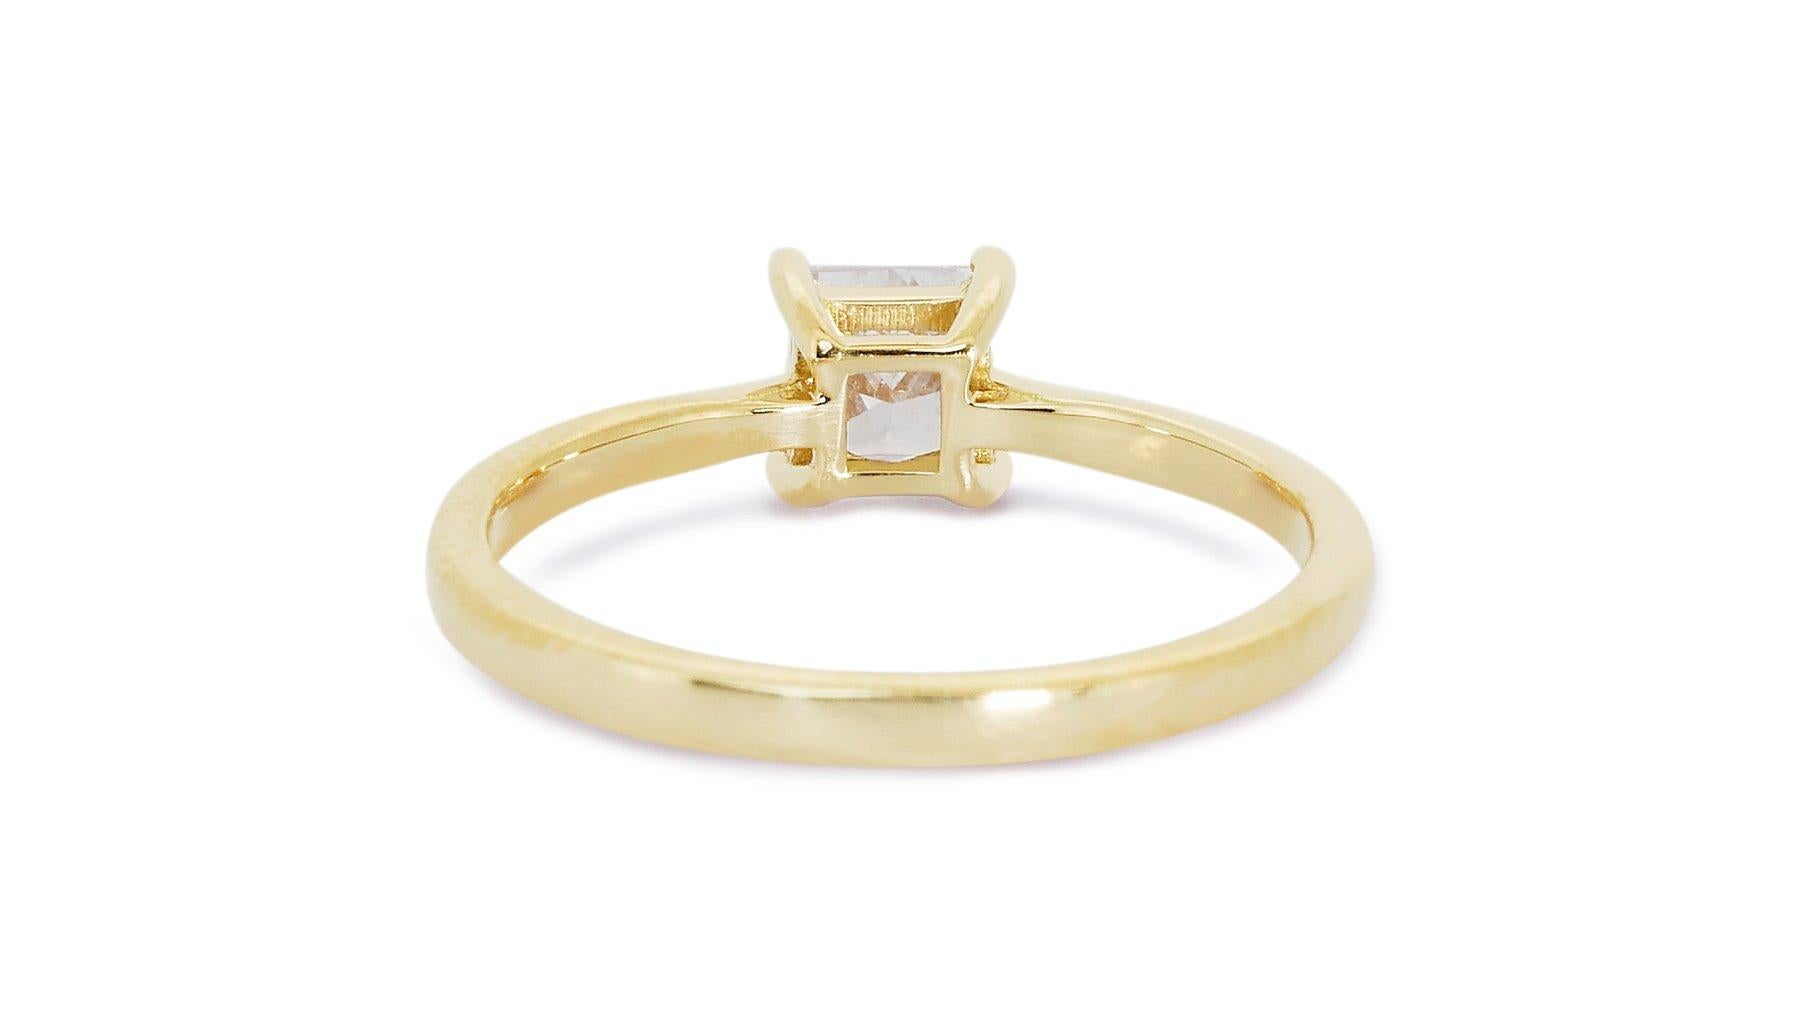 Splendid 18K Yellow Gold Solitaire Diamond Ring with 0.90ct - GIA Certified For Sale 2